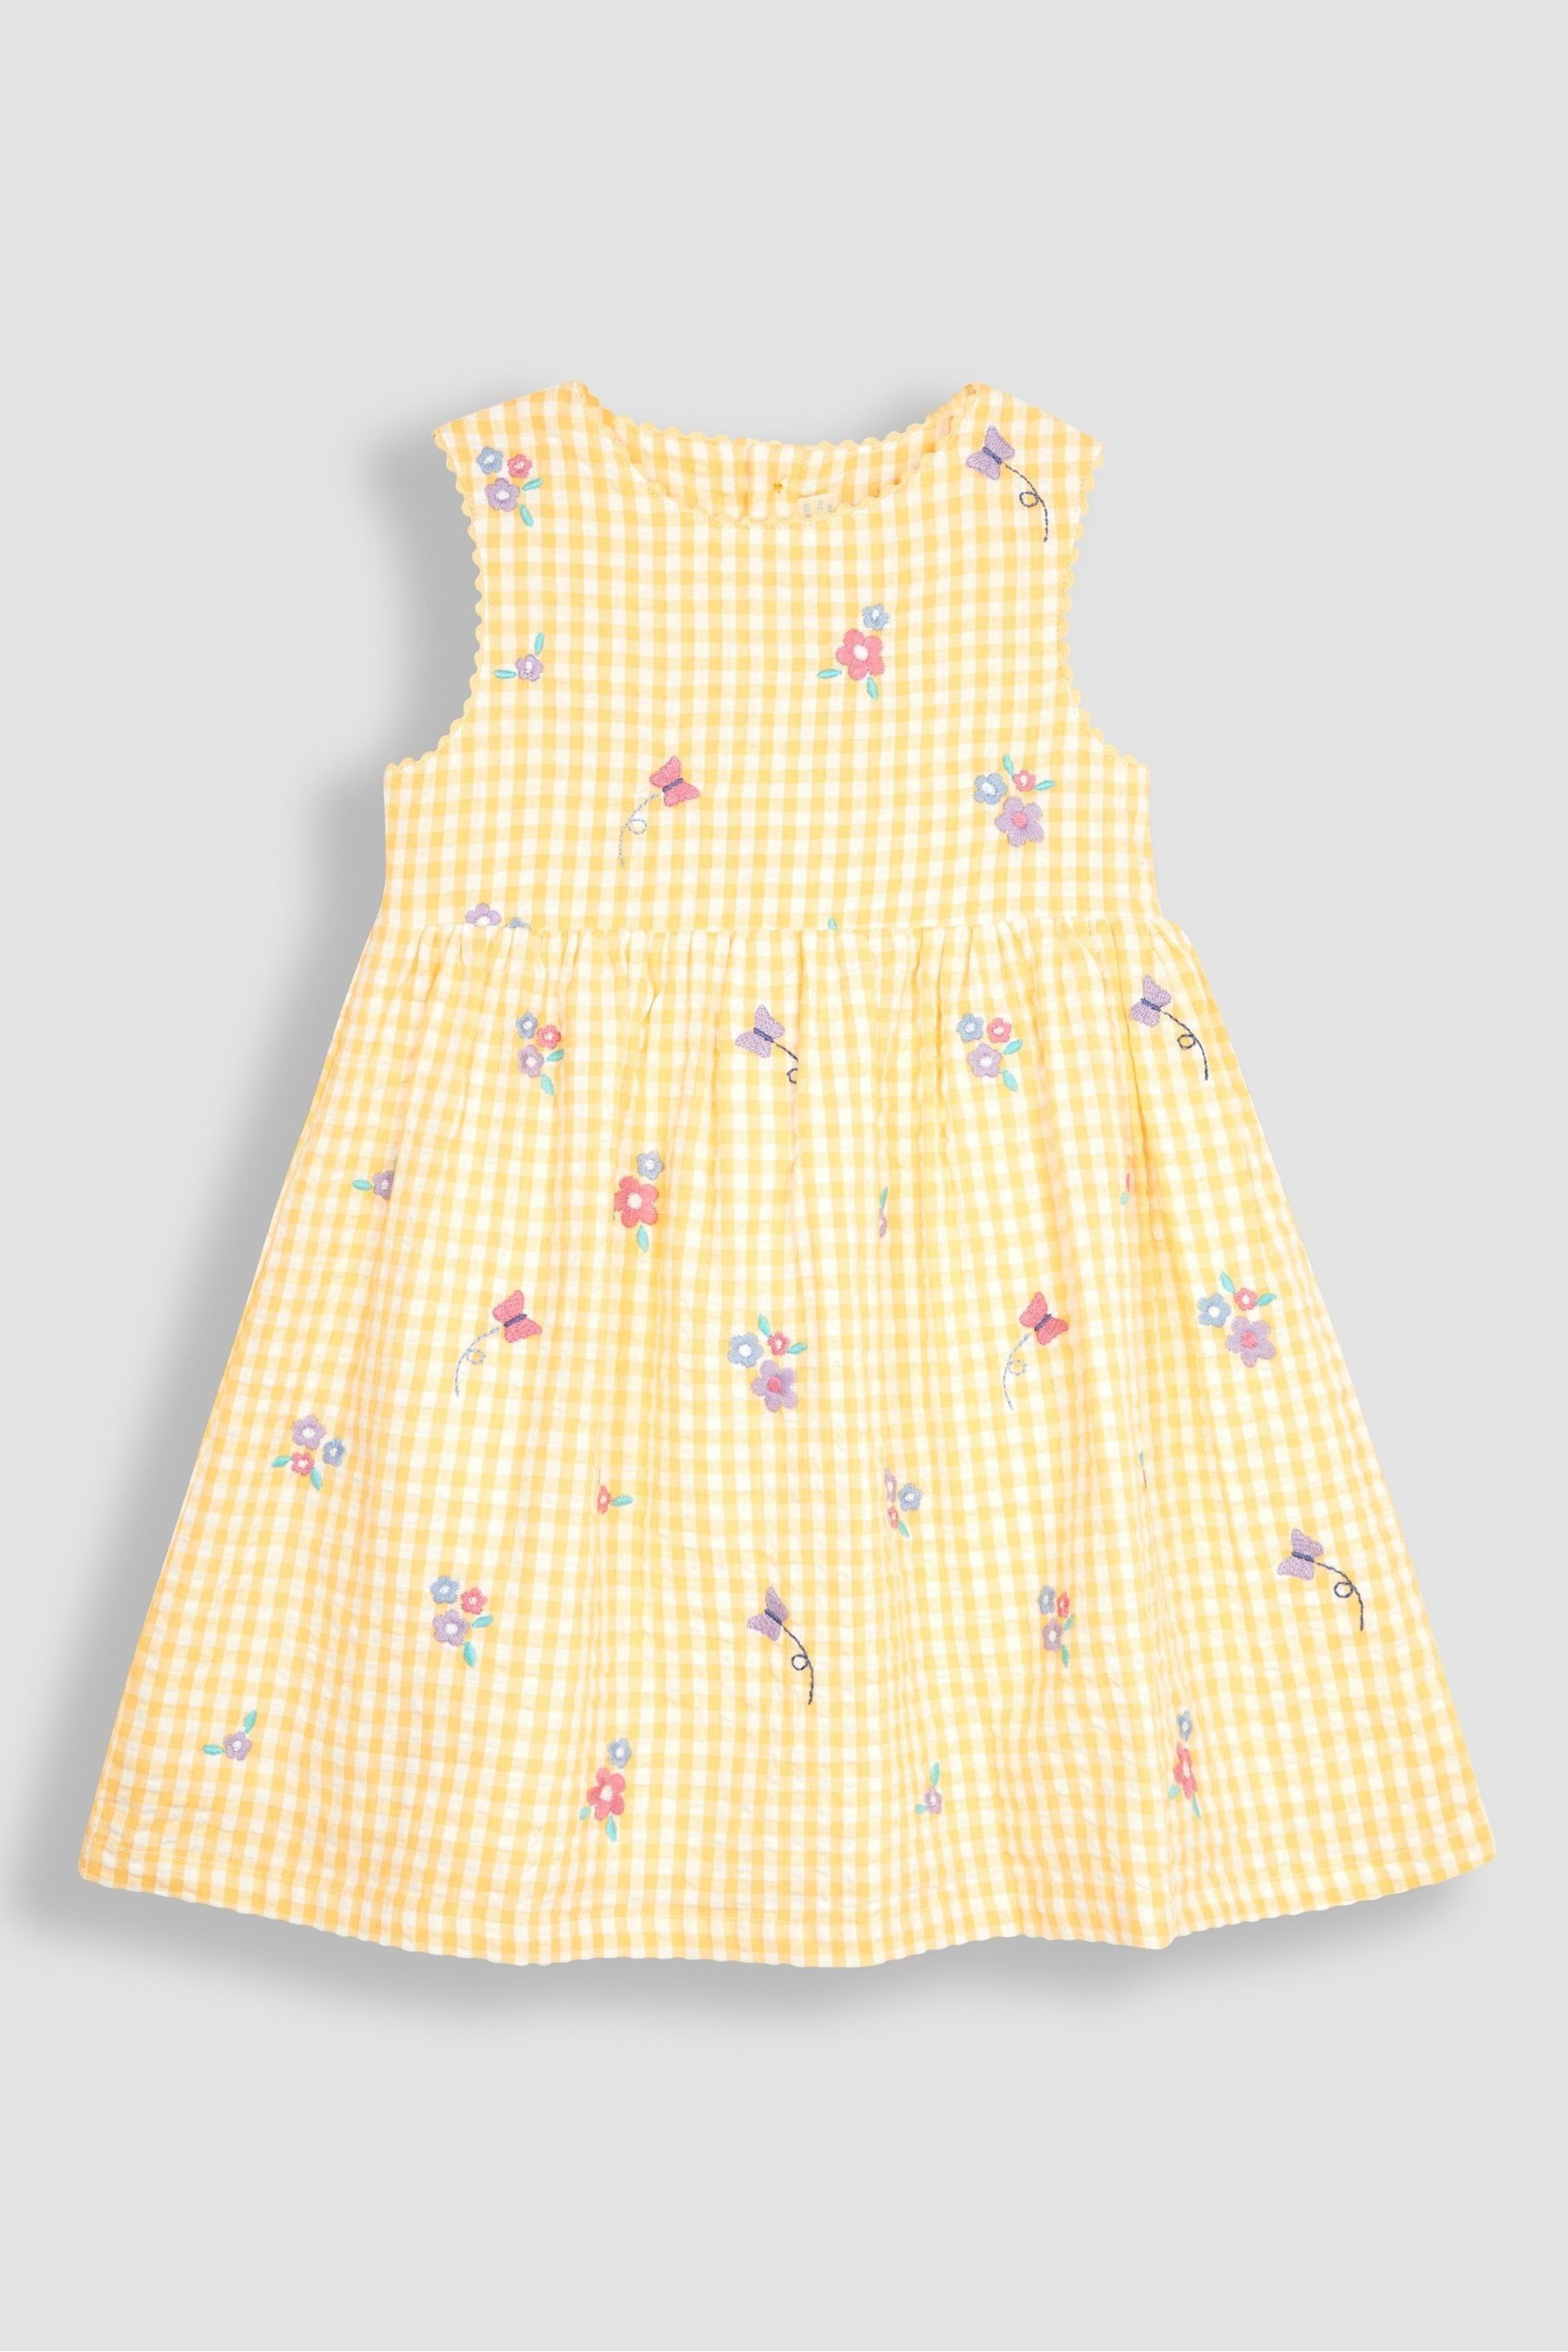 JoJo Maman Bébé Yellow Butterfly Gingham Embroidered Summer Dress - Image 1 of 3